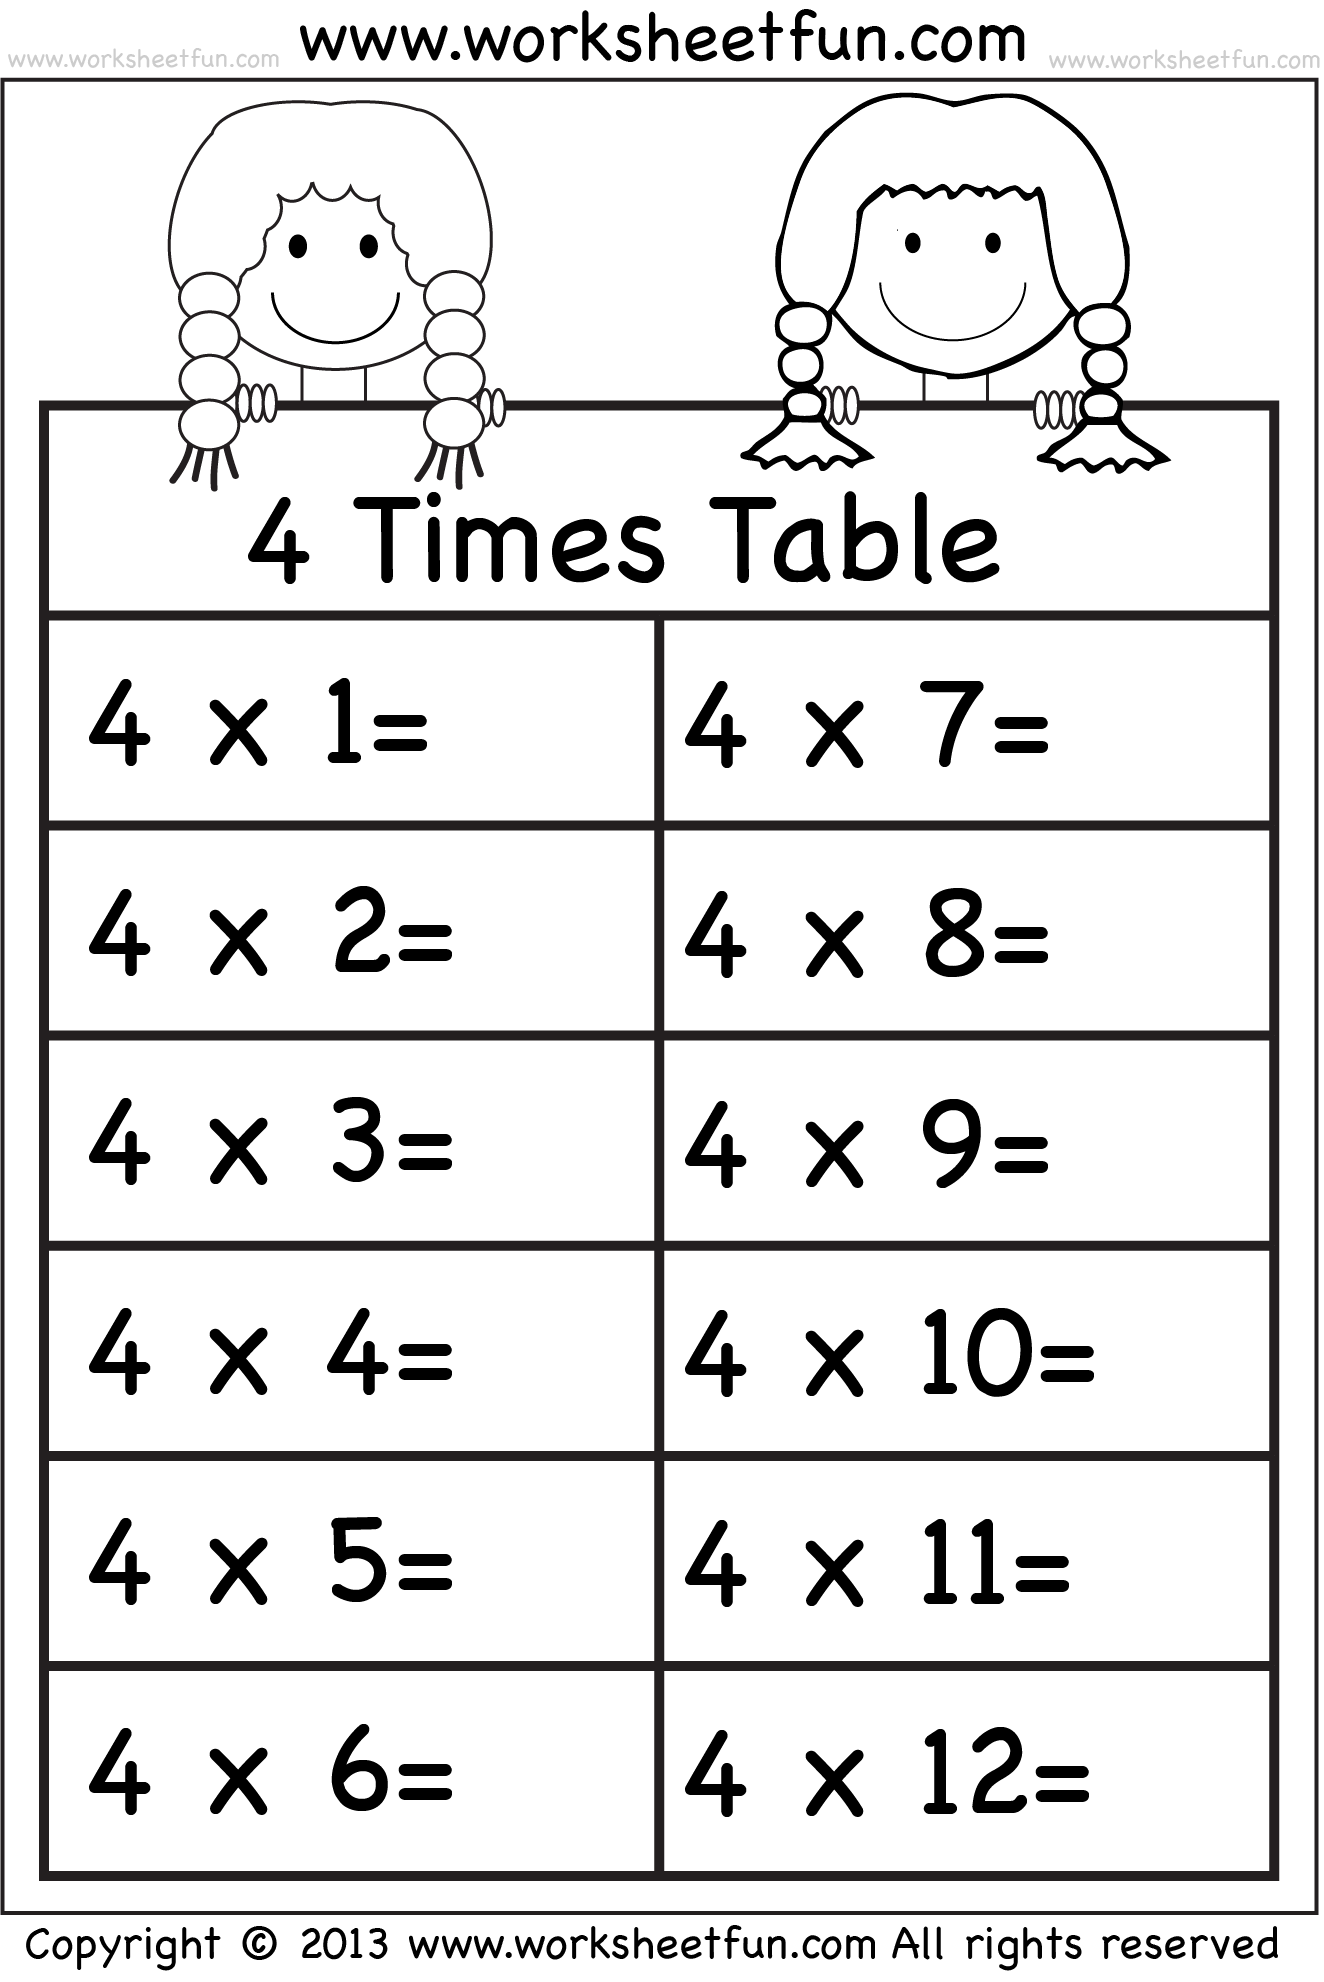 Times Tables Worksheets 2 3 4 5 6 7 8 9 10 11 And 12 Eleven Worksheets FREE 